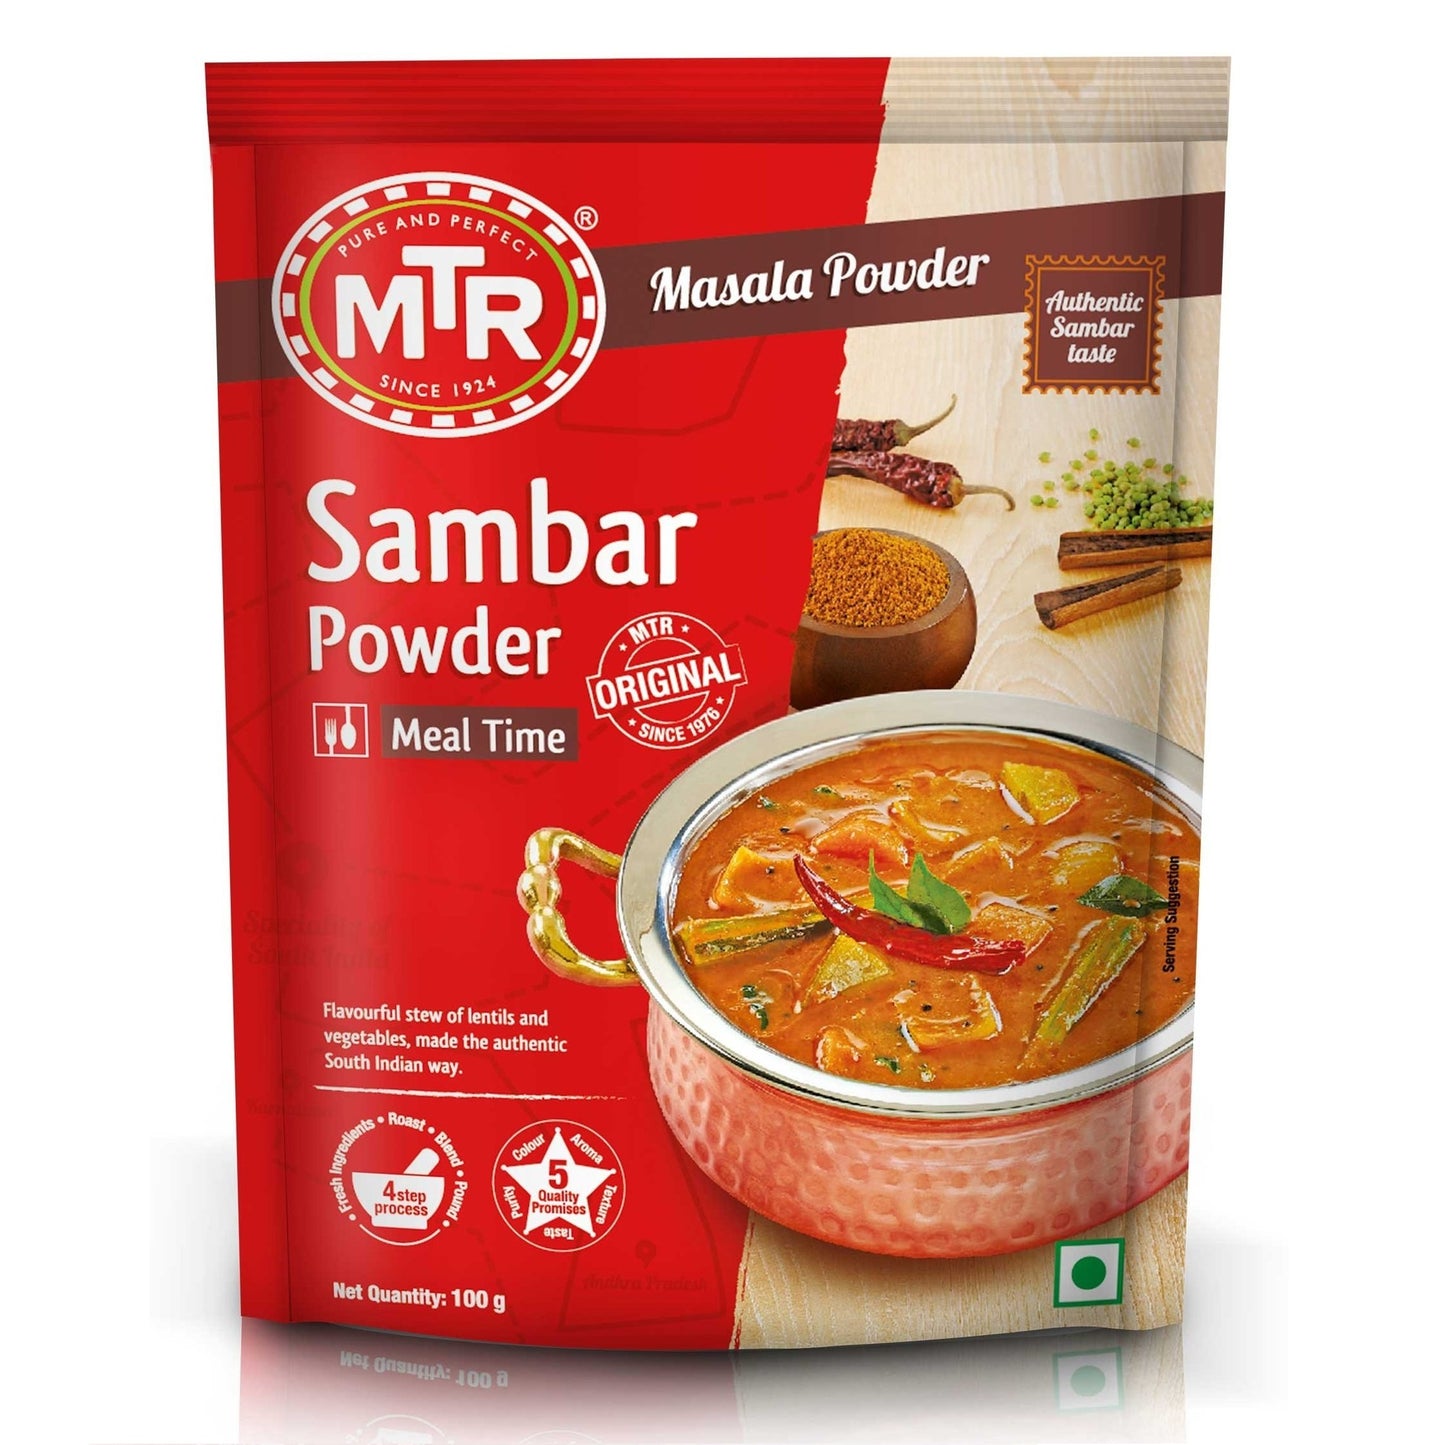 Famous Sambar Powder from MTR, very tasty stew of lentils, red chillies & vegetables - made the authentic South Indian way with a spicy twist.